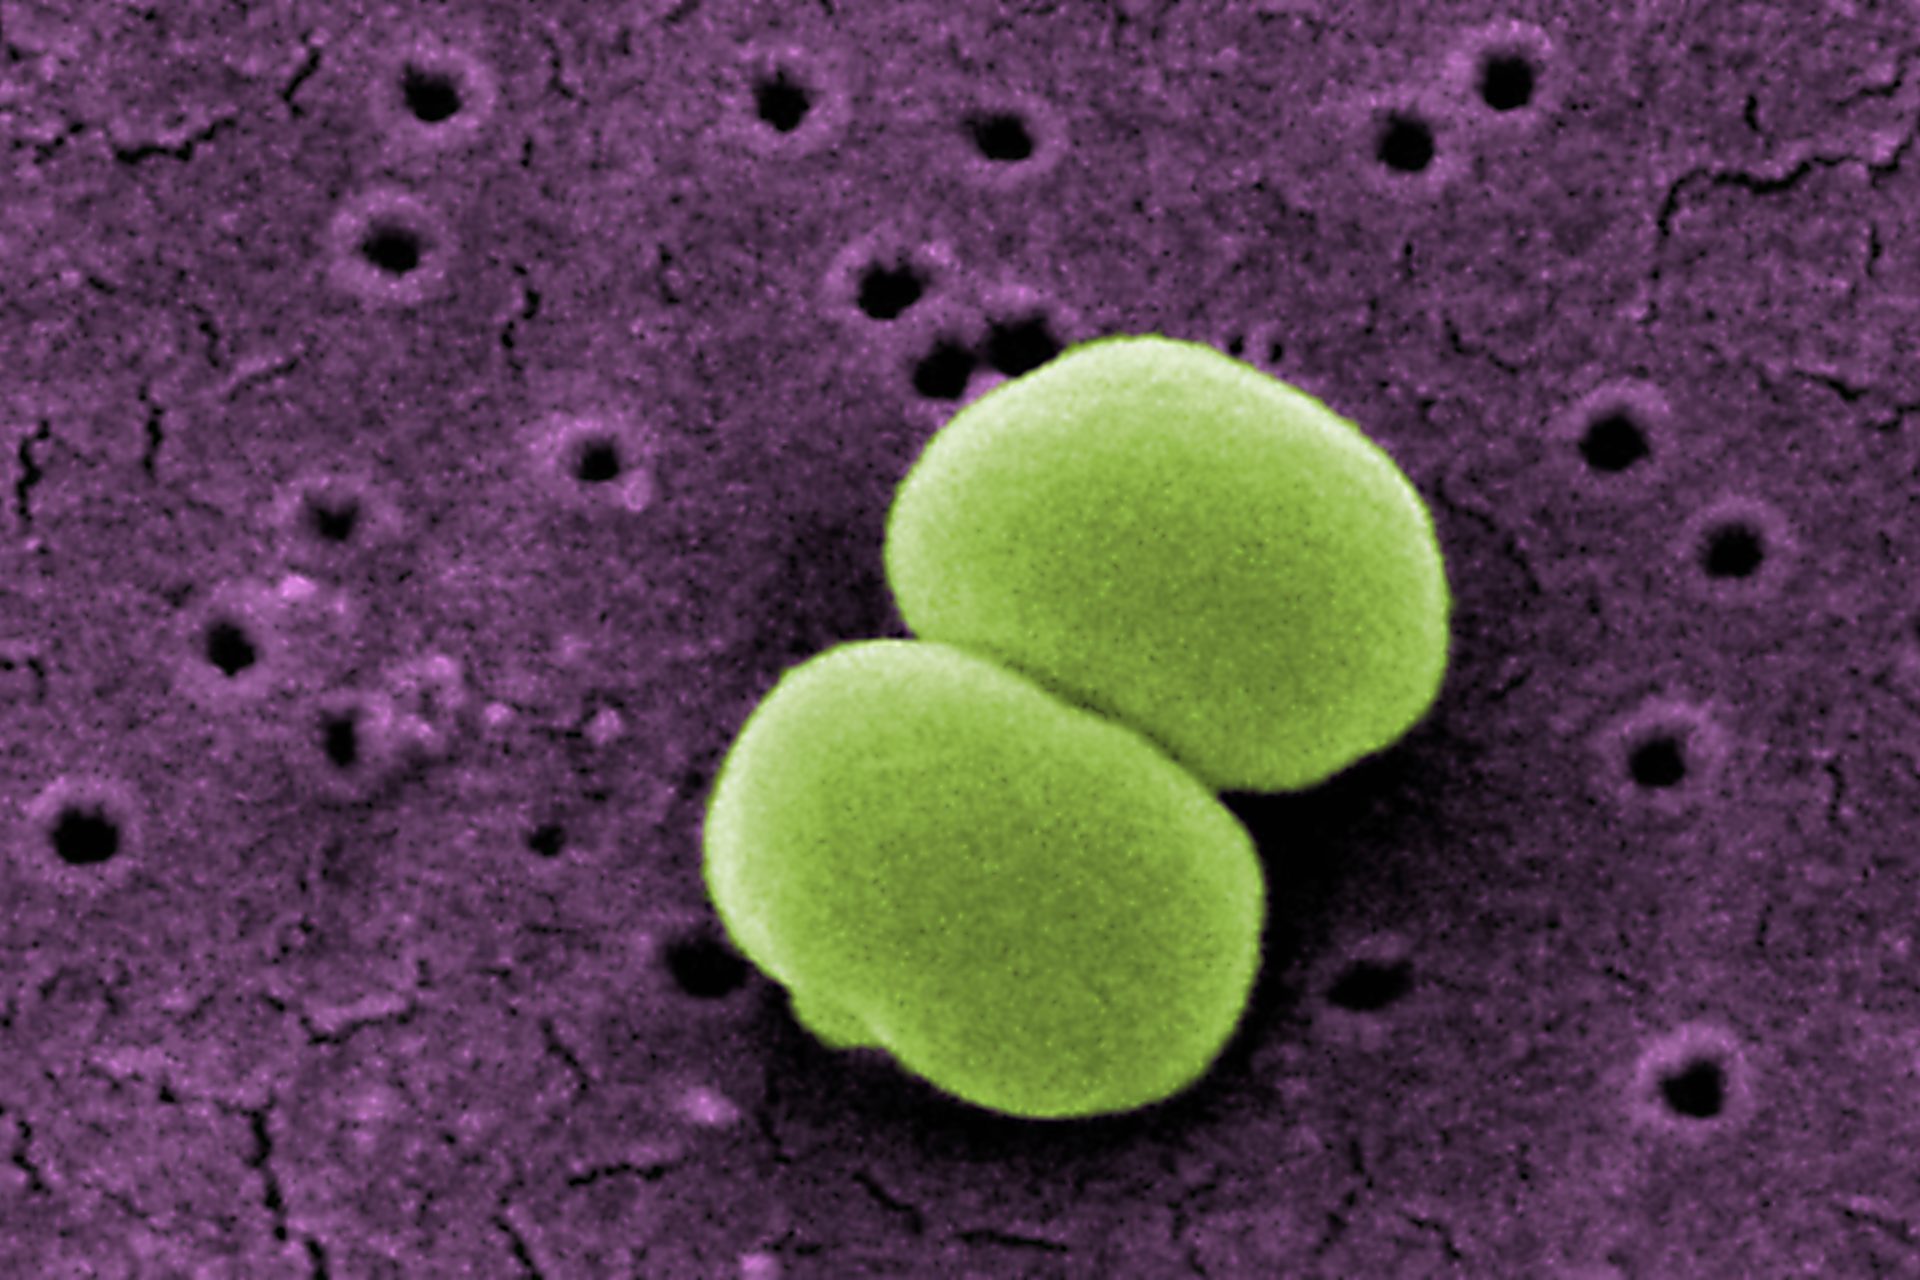 Staphylococcus epidermidis is also very smelly